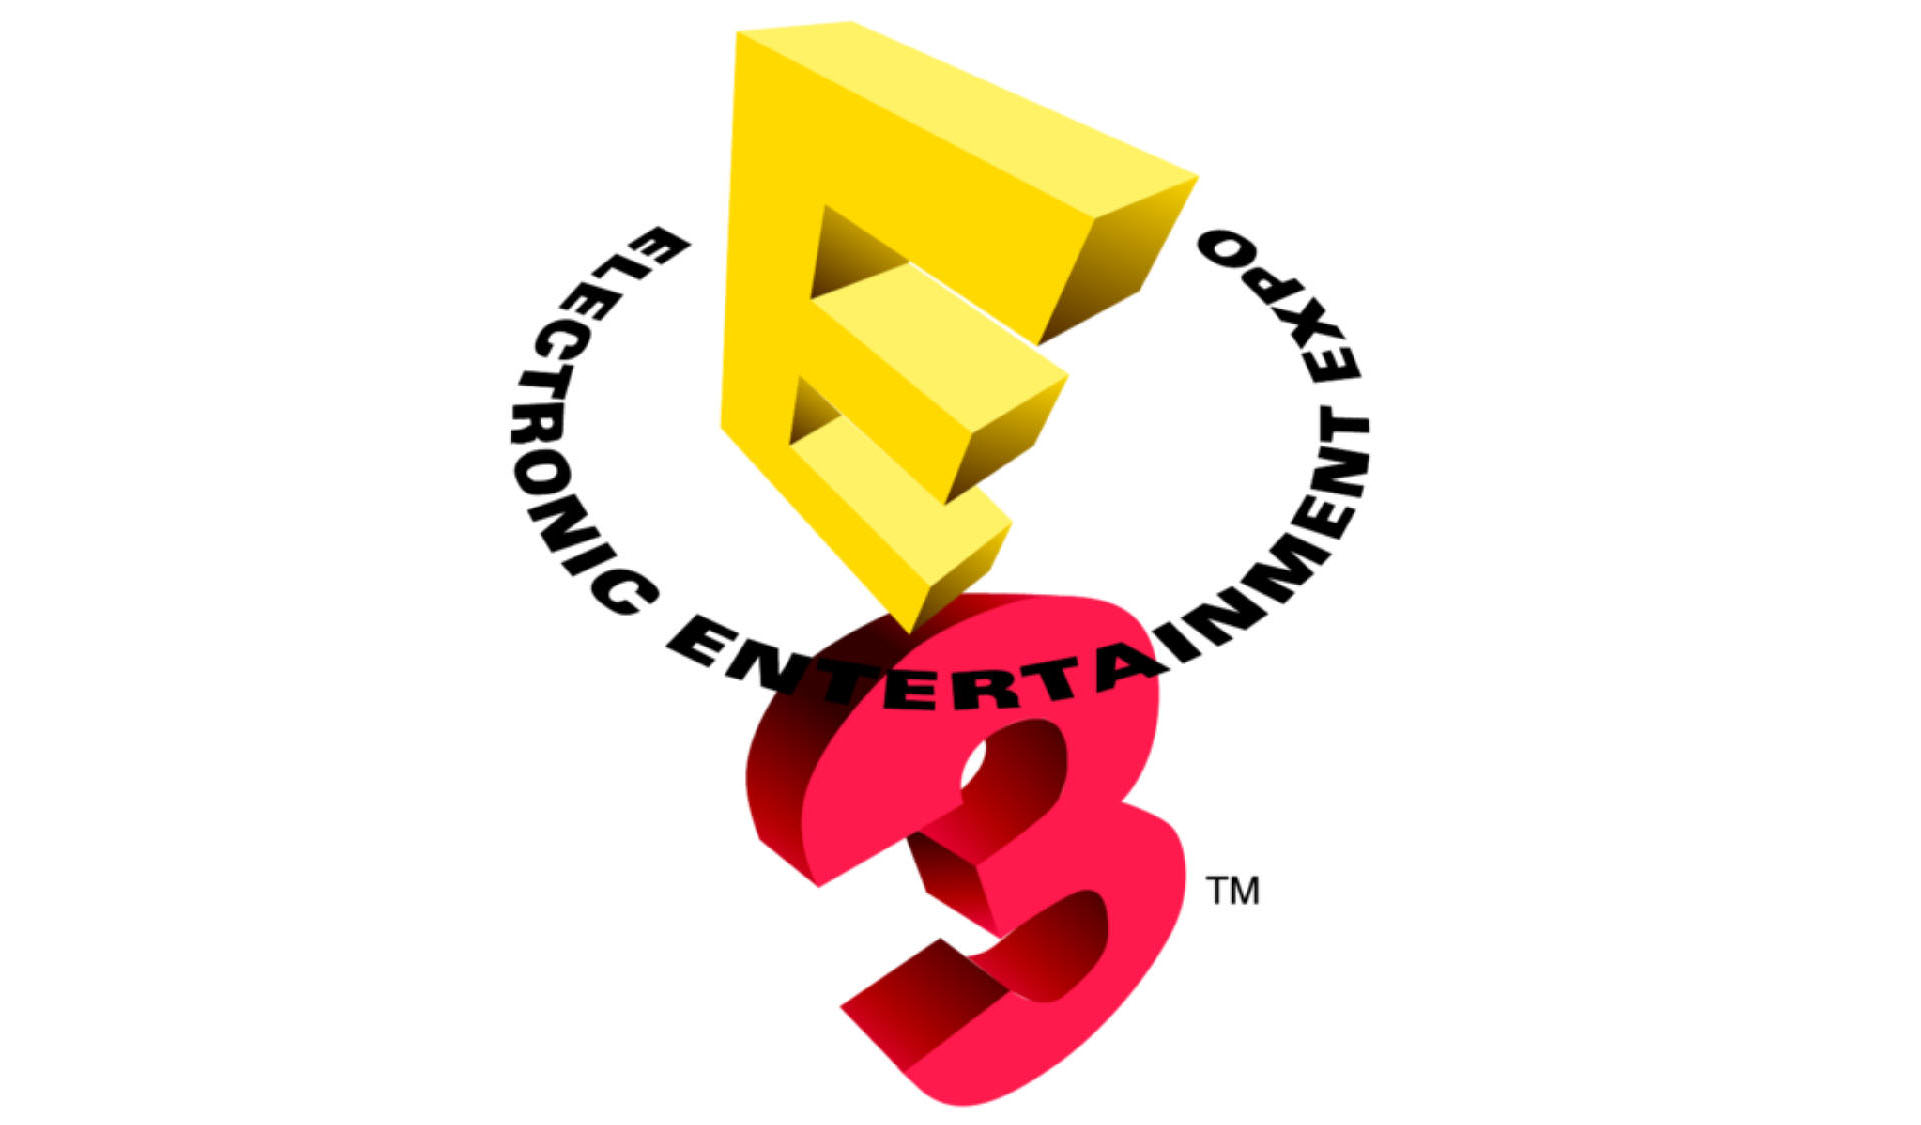 Expected Games and Hardware in E3 2015